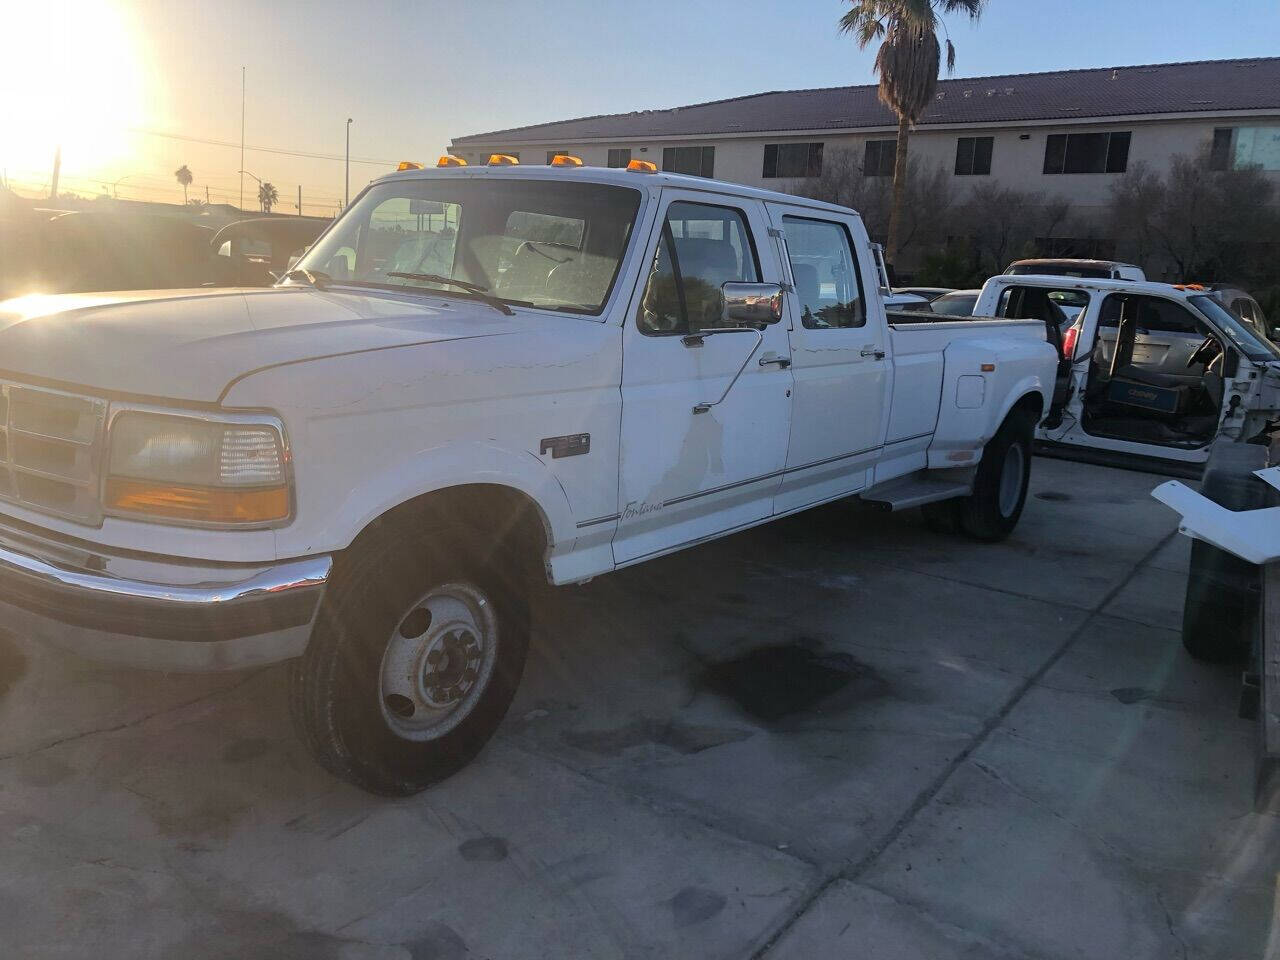 1995 Ford F-350 For Sale ®